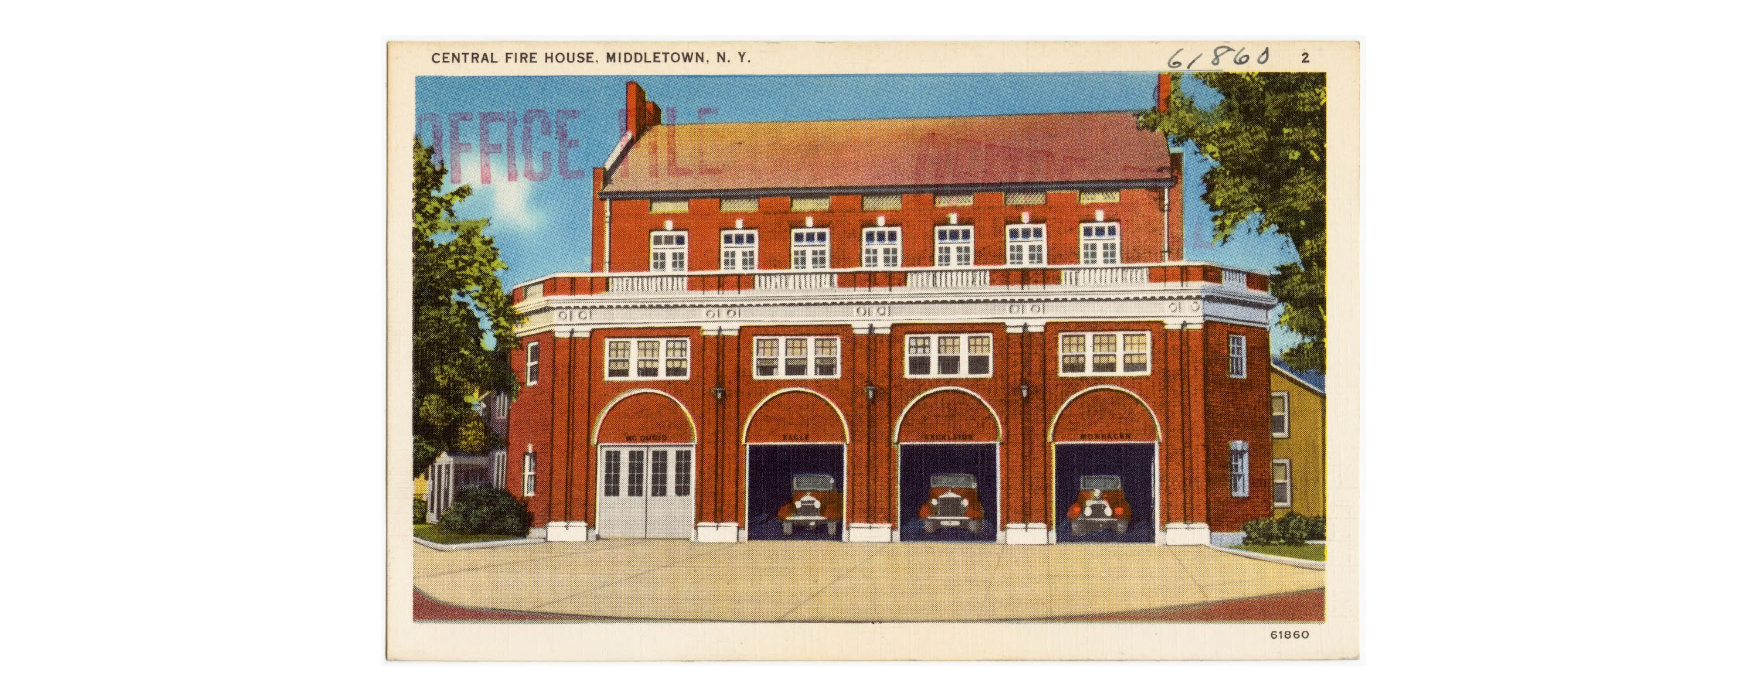 Central Firehouse in Middletown, NY